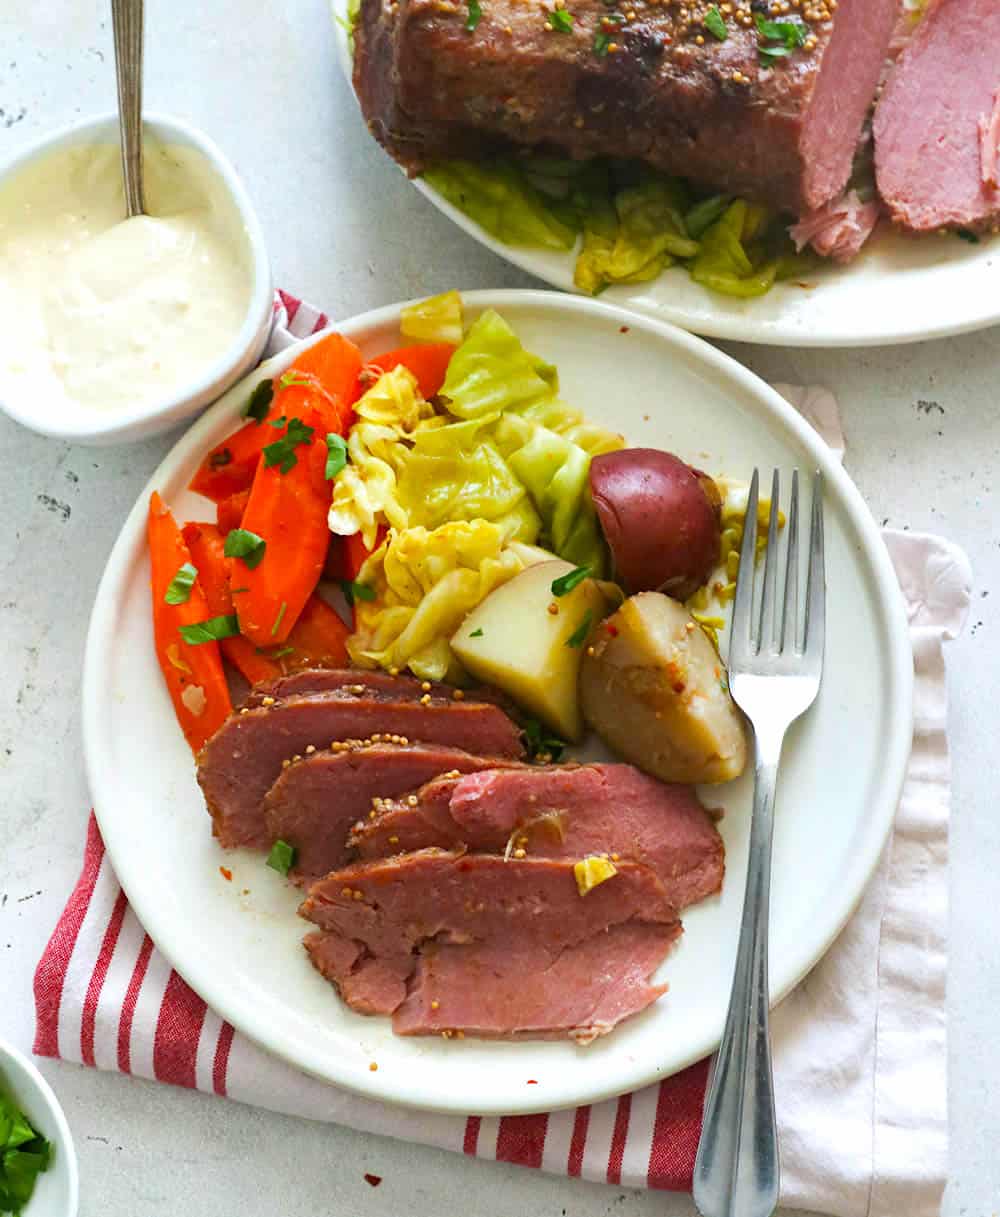 Enjoying Instant Pot corned beef with potatoes and cabbage on St. Patricks or New Year's Day